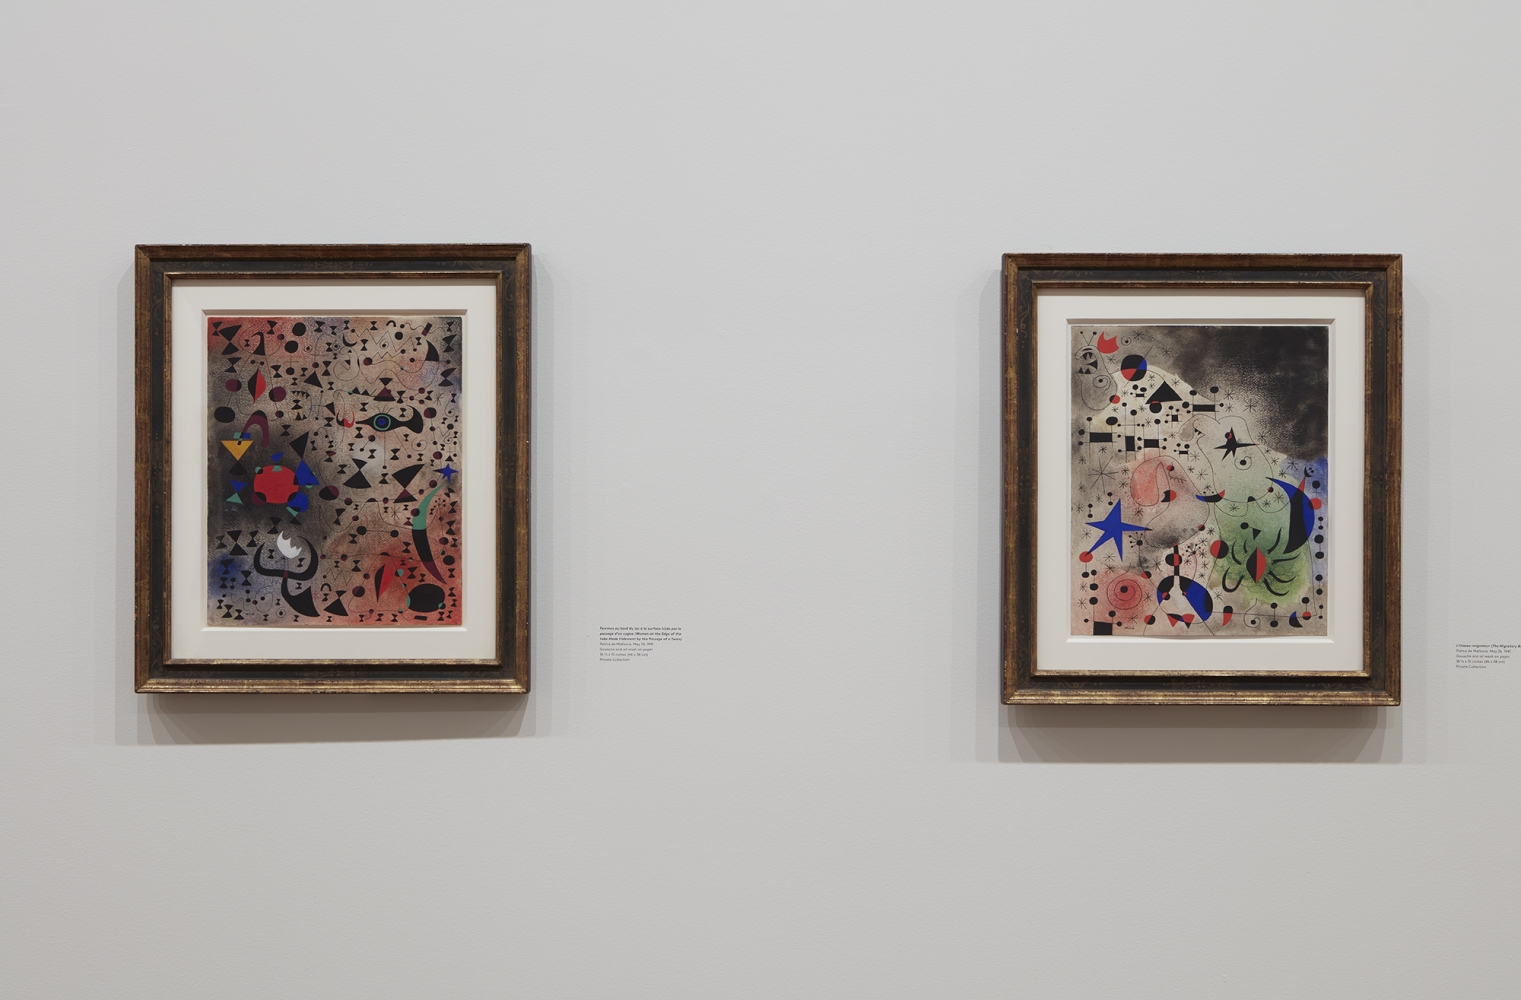 Installation view of&nbsp;Calder |&nbsp;Mir&oacute; Constellations&nbsp;at Acquavella Galleries in collaboration with the Pace Gallery&nbsp;from April 20&ndash;May 26, 2017.&nbsp;Left to right:&nbsp;, Femmes au bord du lac &agrave; la surface iris&eacute;e par le passage d&rsquo;un cygne (Women at the Edge of the Lake Made Iridescent by the Passage of a Swan), 1941, Lent by&nbsp;Private Collection&nbsp;